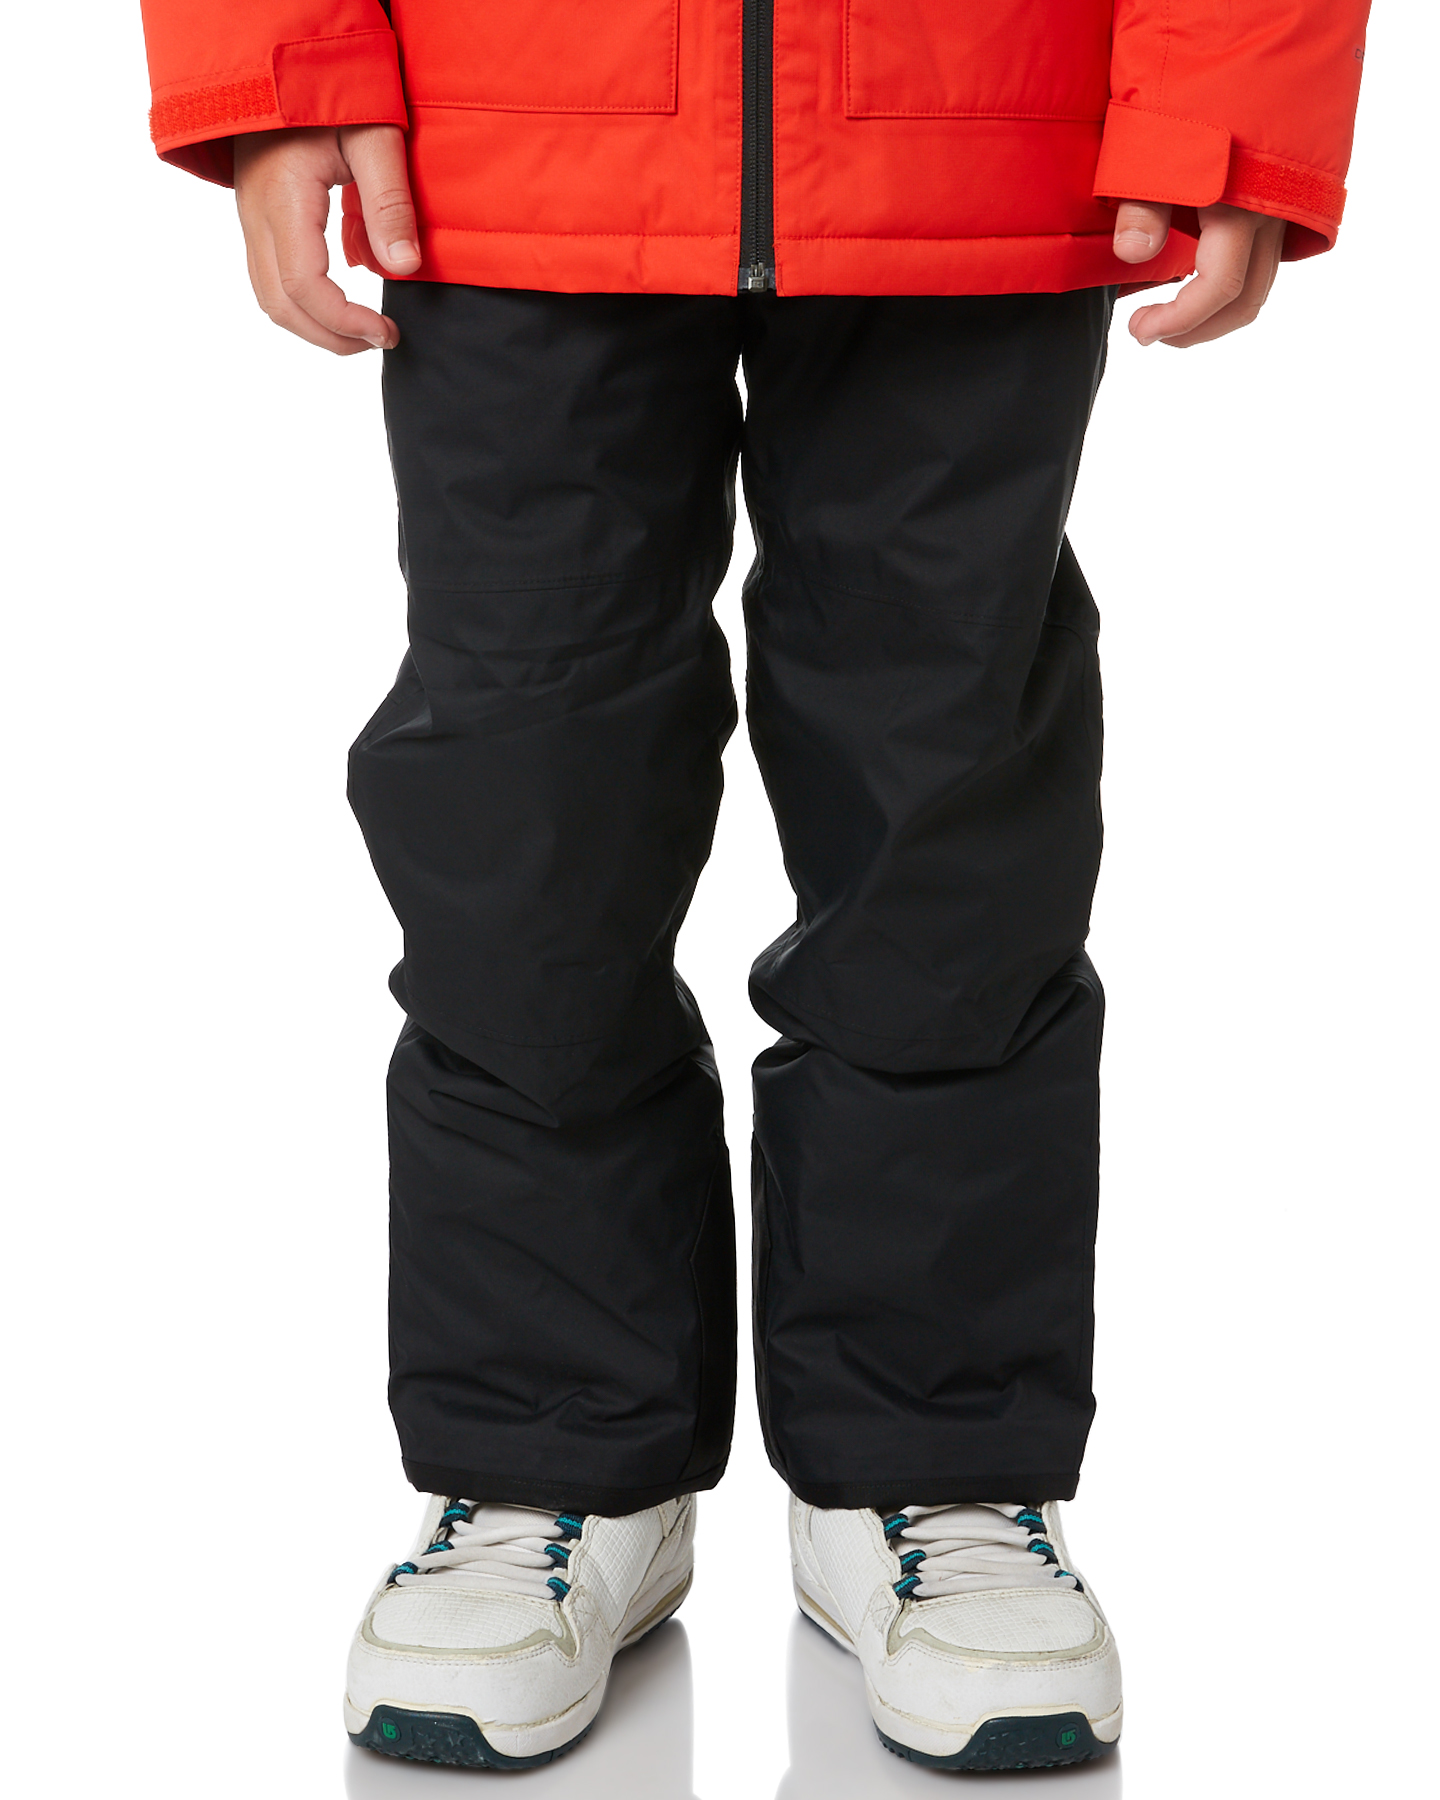 north face baby snow pants